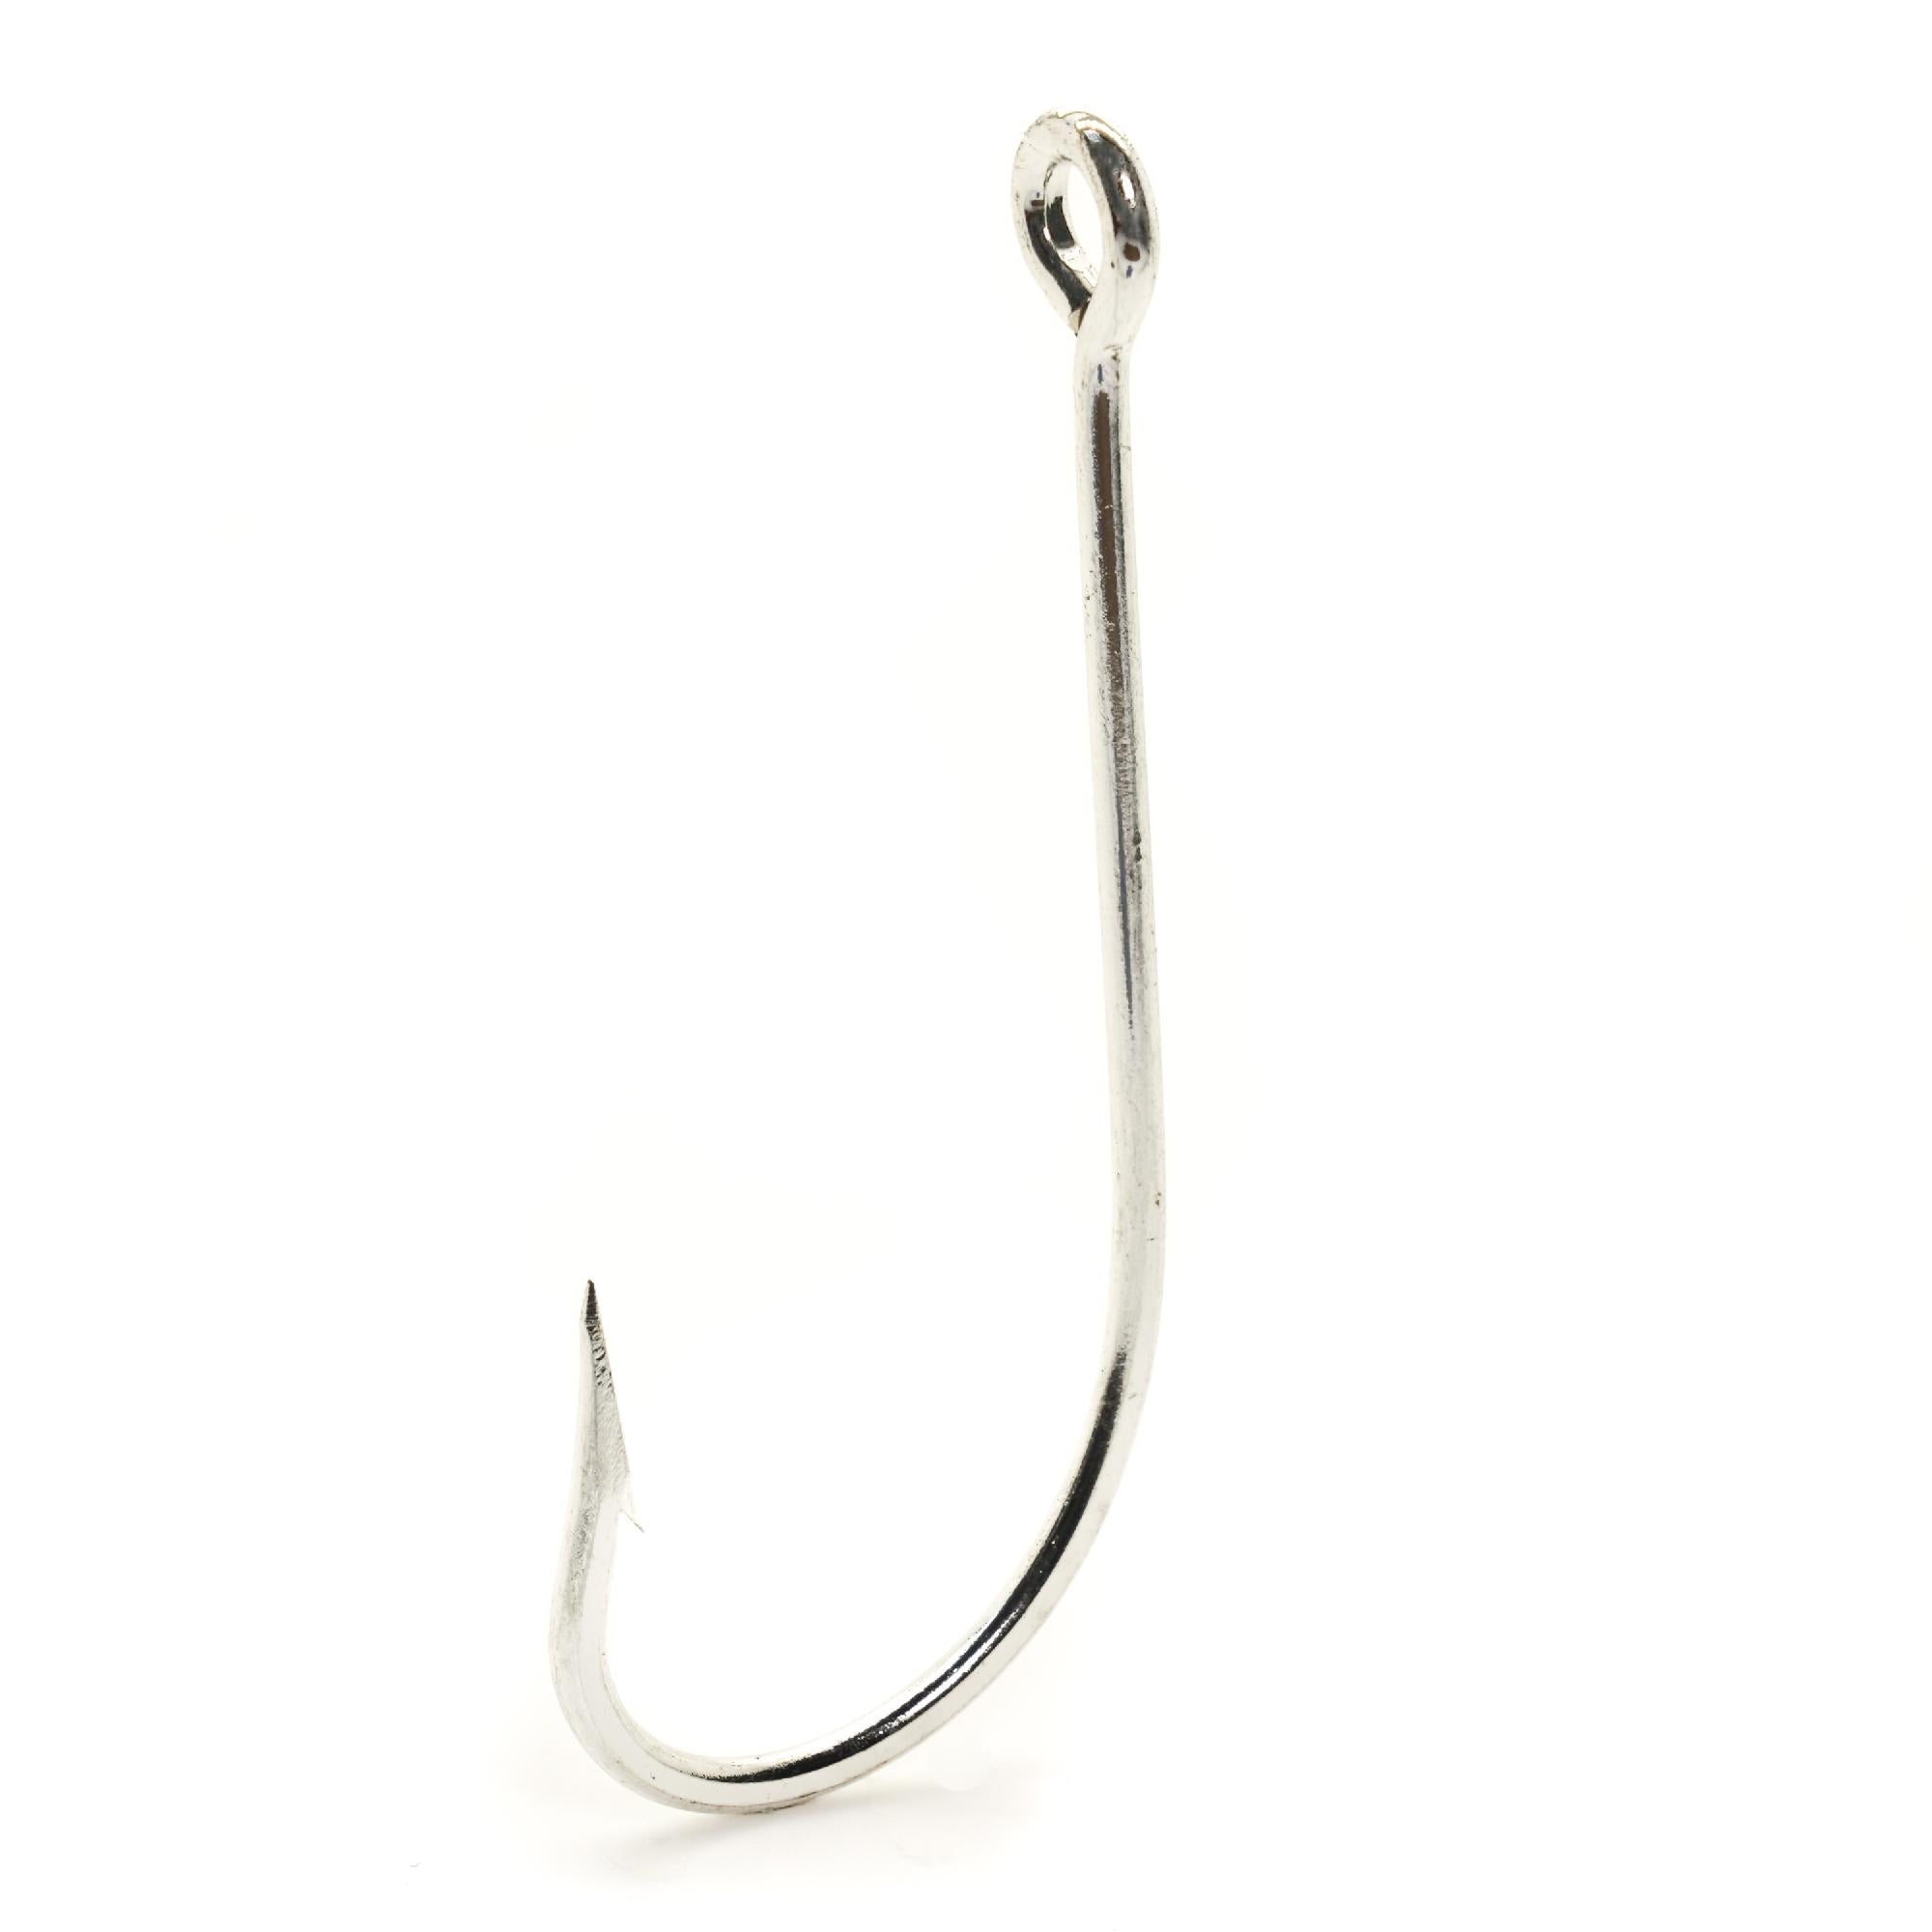 O'Shaughnessy Large Ring Hook